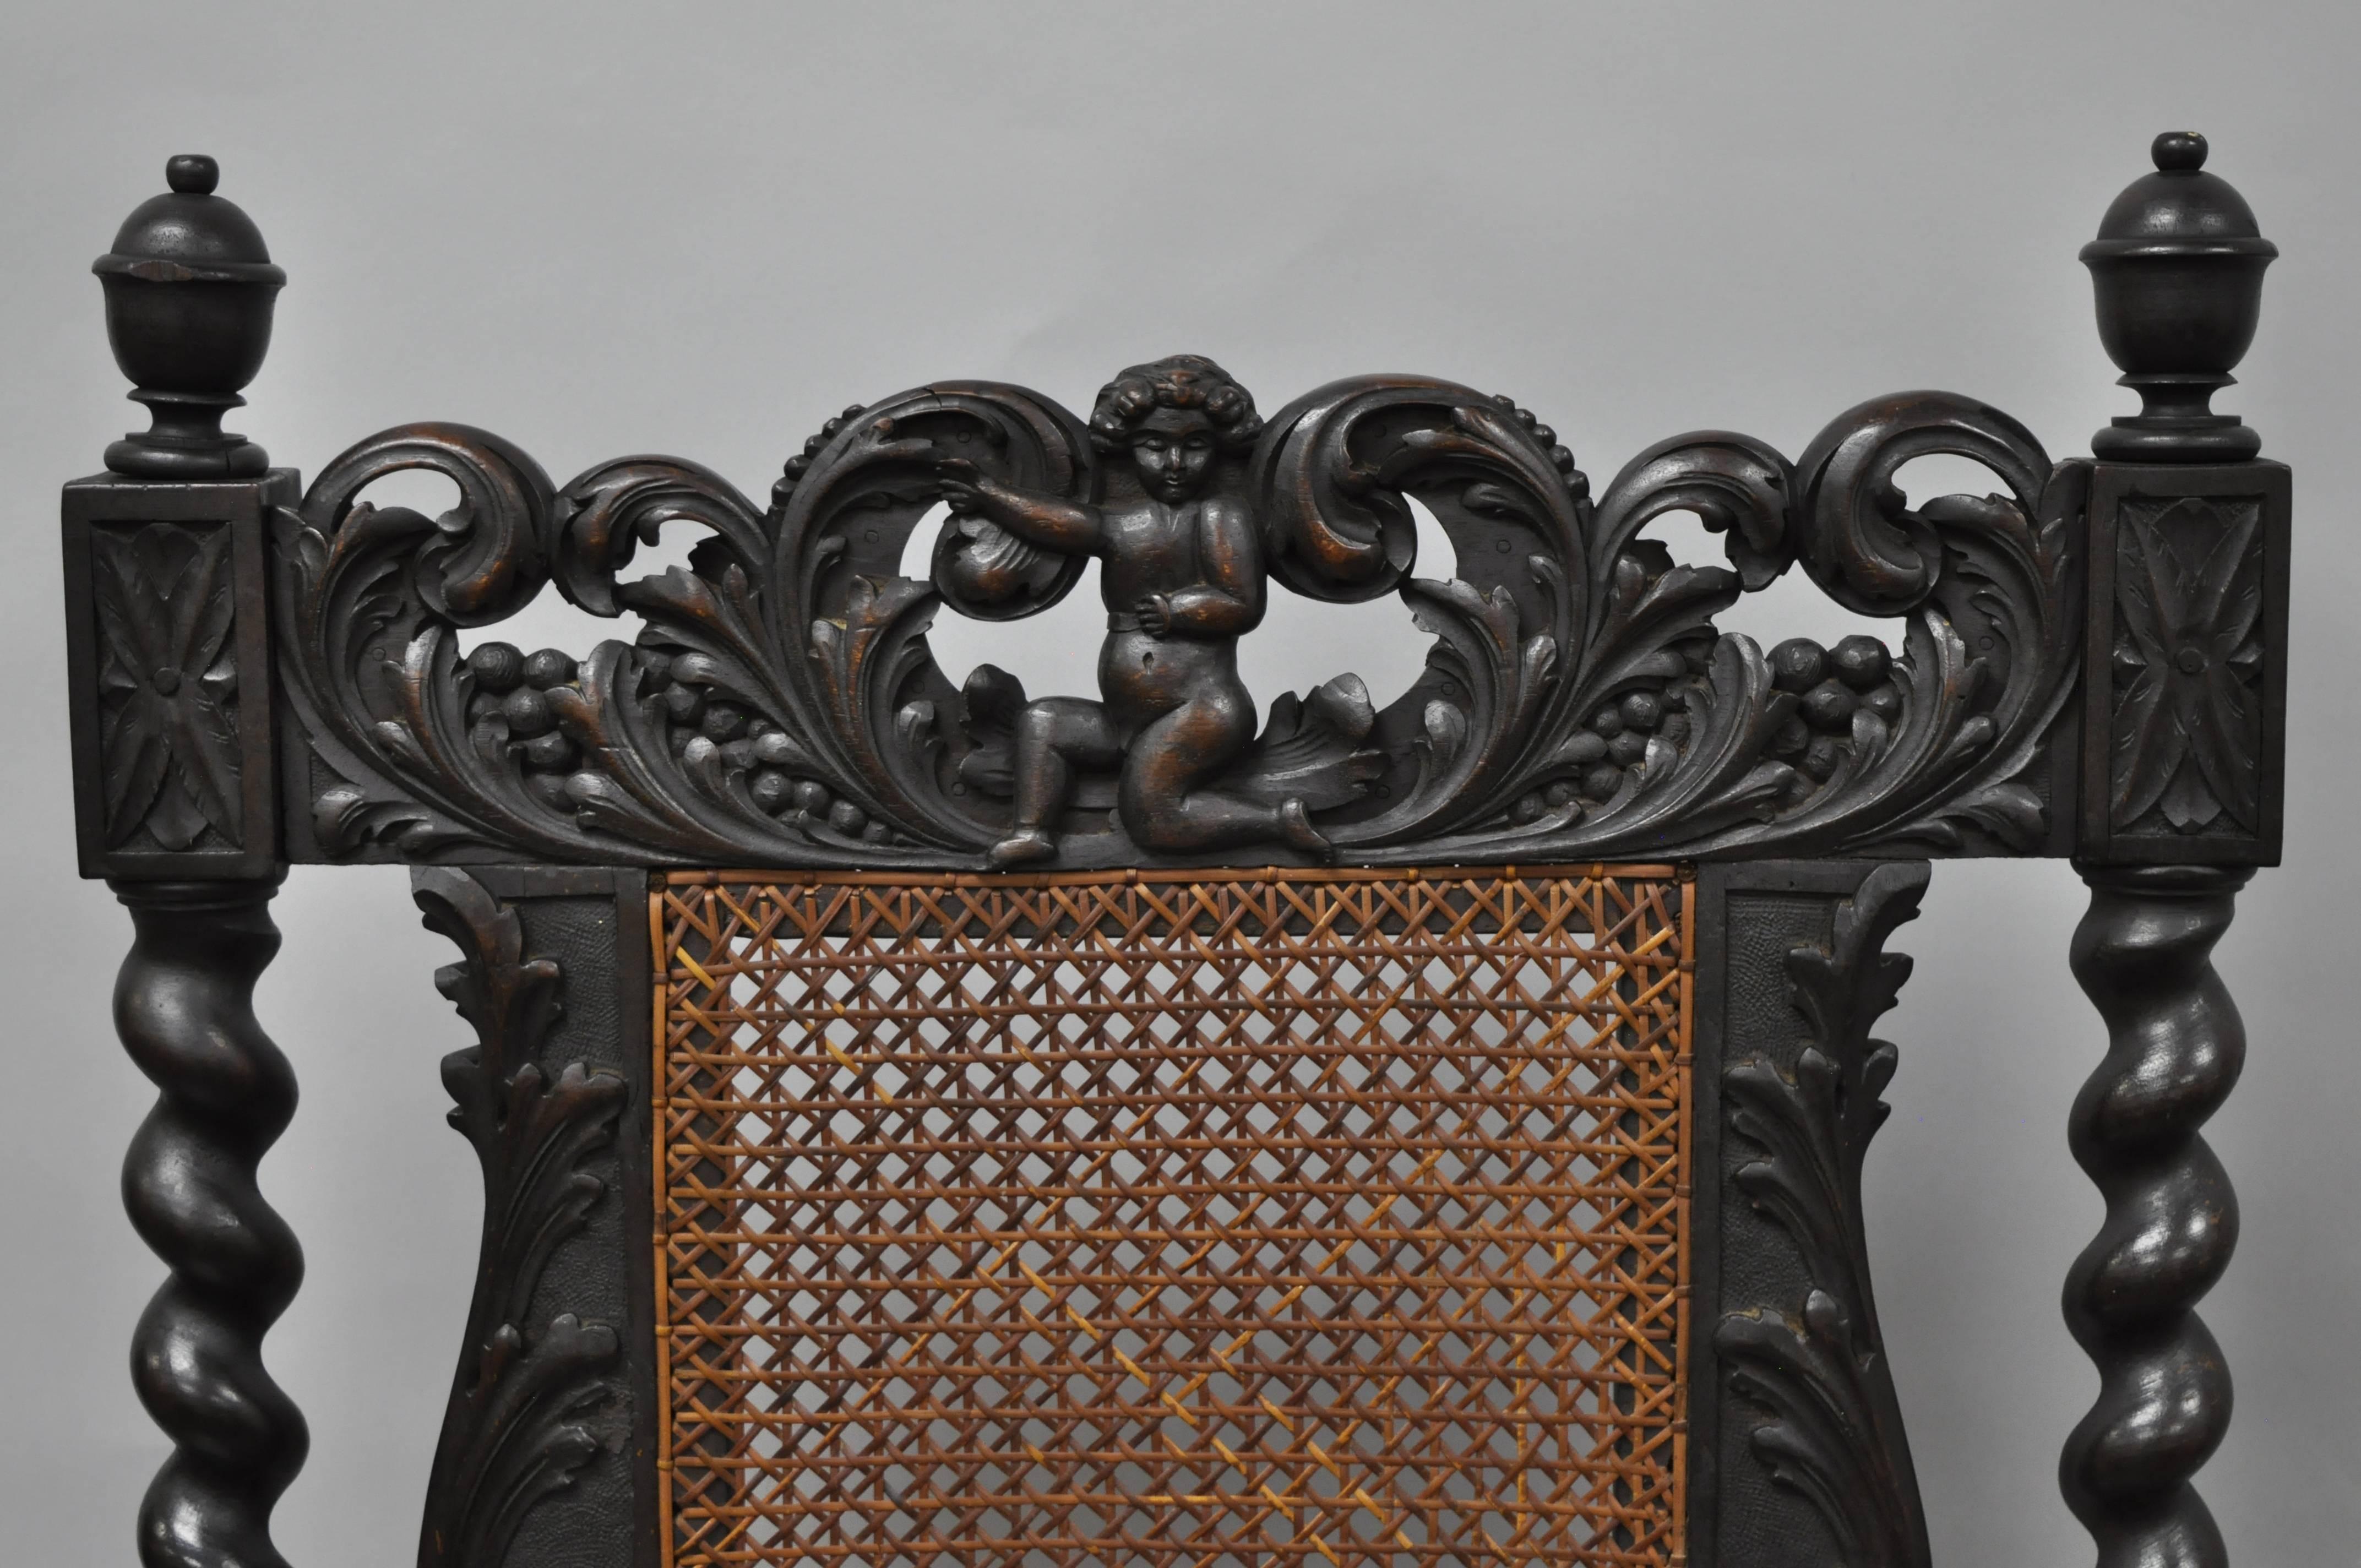 Stunning 19th century Jacobean / Renaissance Revival carved walnut armchairs. Chairs feature ornate spiral carved barley twist walnut frames with leafy scroll work, cherub figures on the upper rail and lower stretcher, tall cane back and seat, and